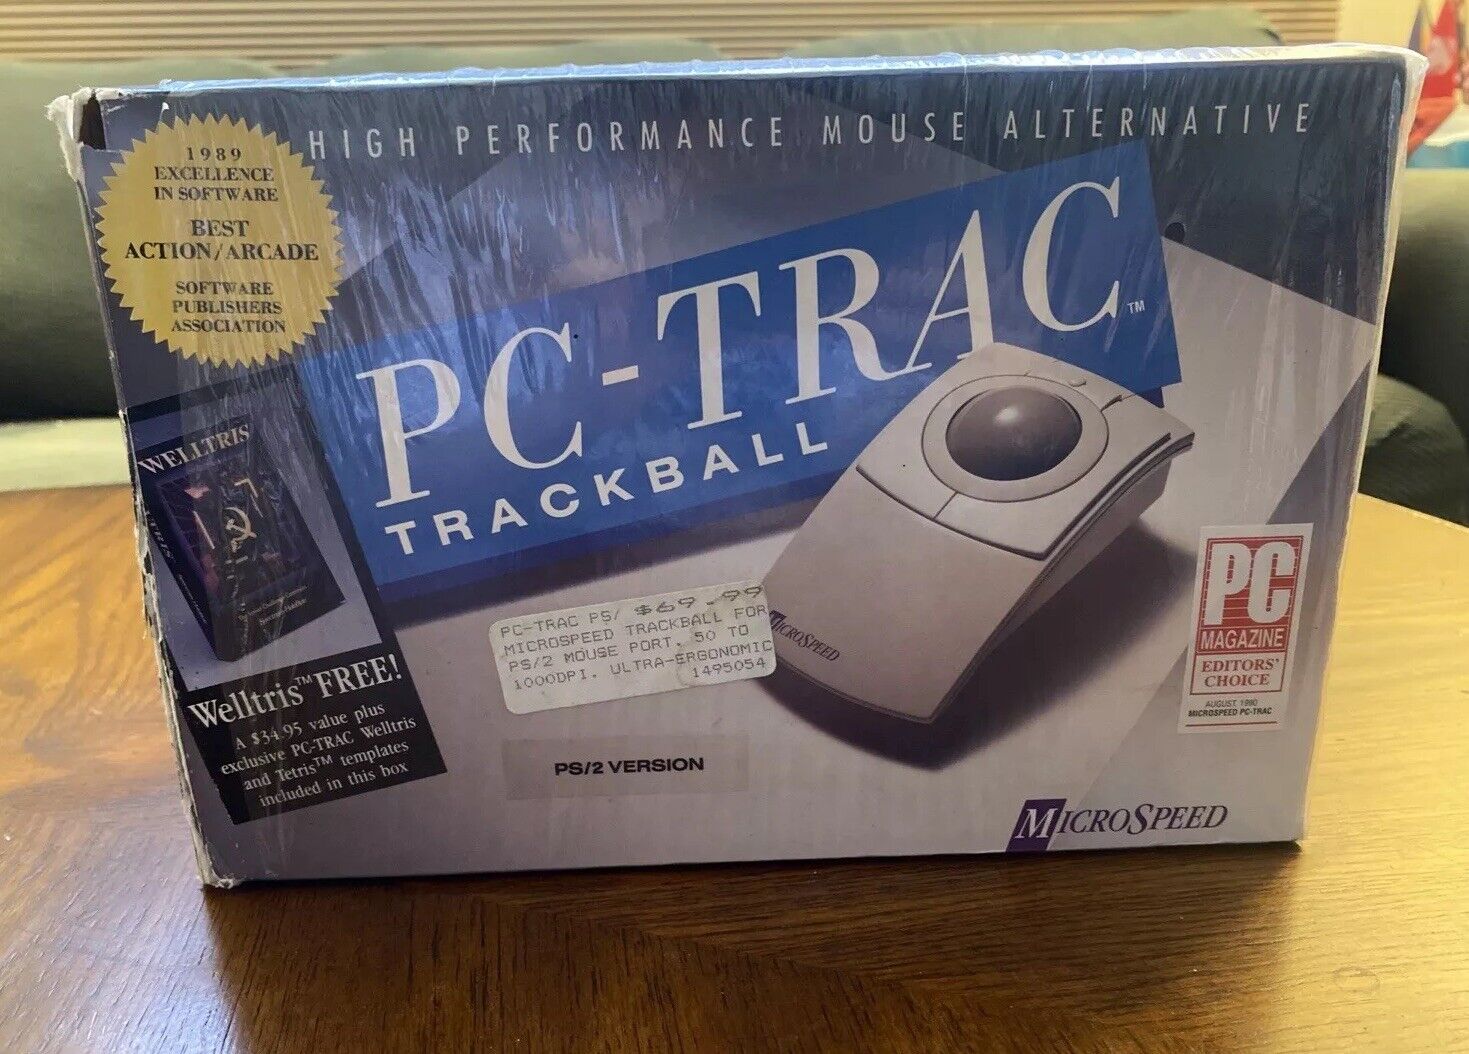 Vintage (1990) PC-Tracball Mouse Sealed (Includes WELLTRIS)